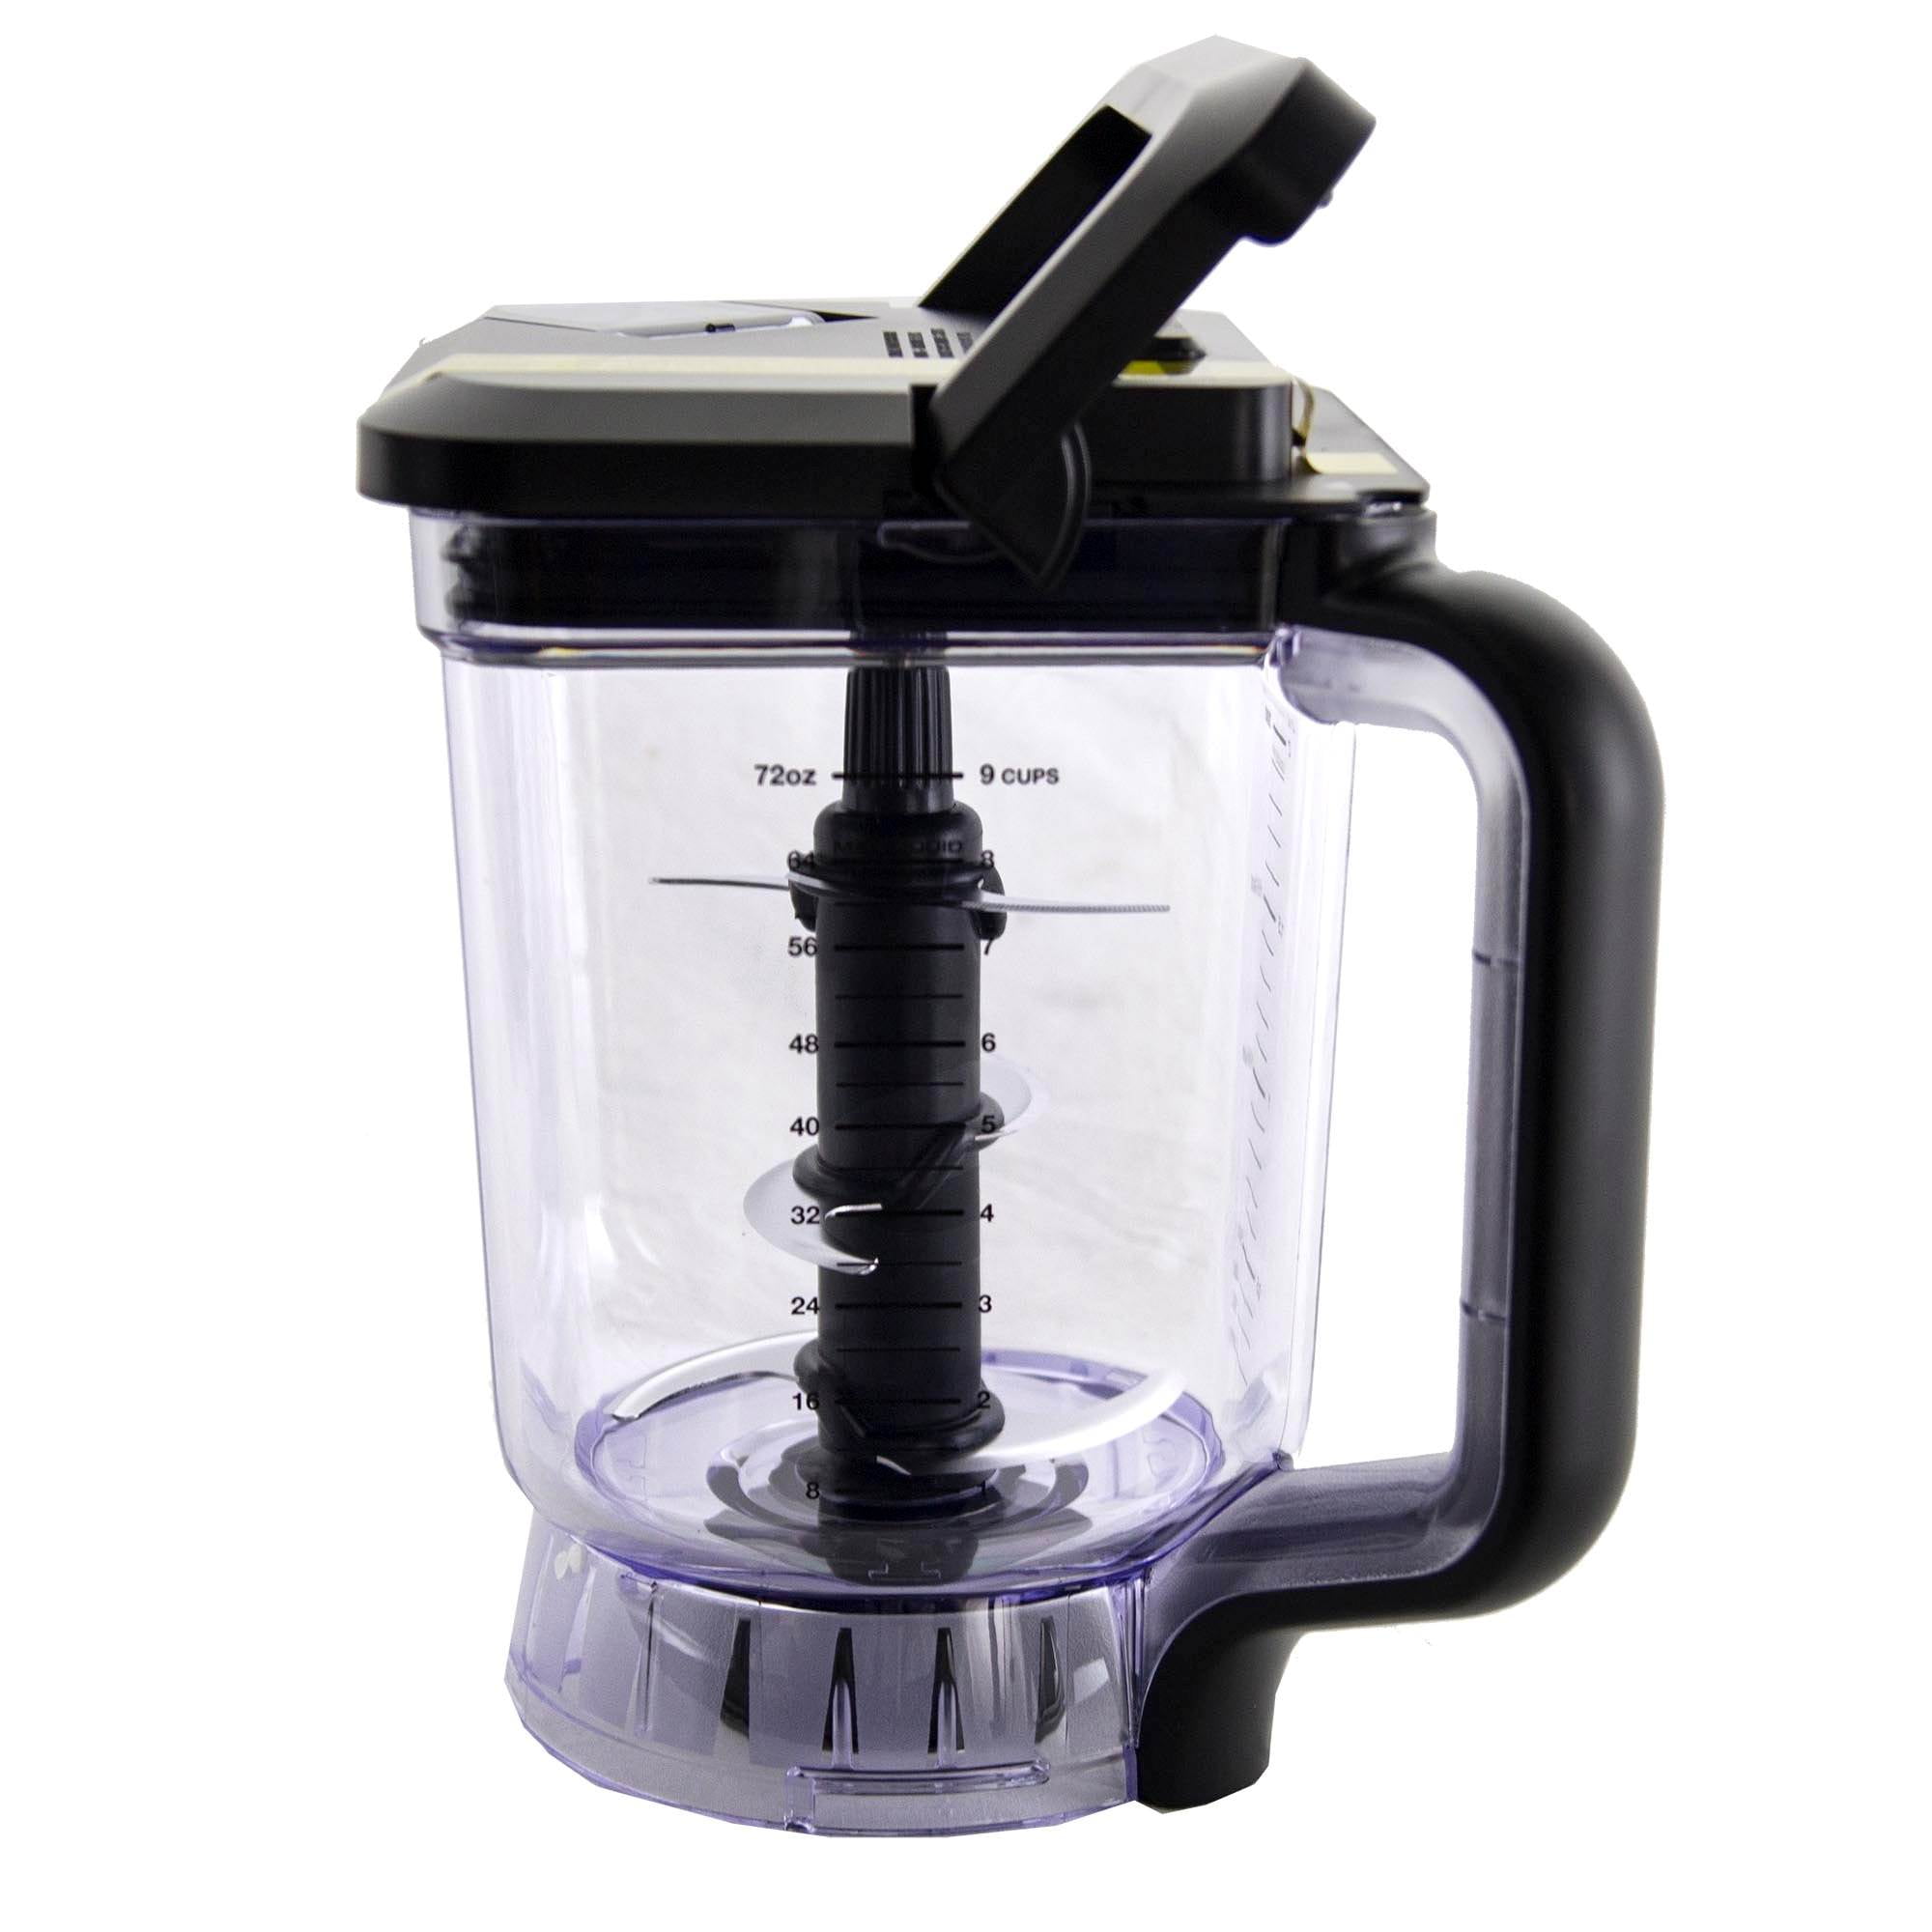 Ninja Blender Replacement Pitcher With Lid And Blades for Sale in